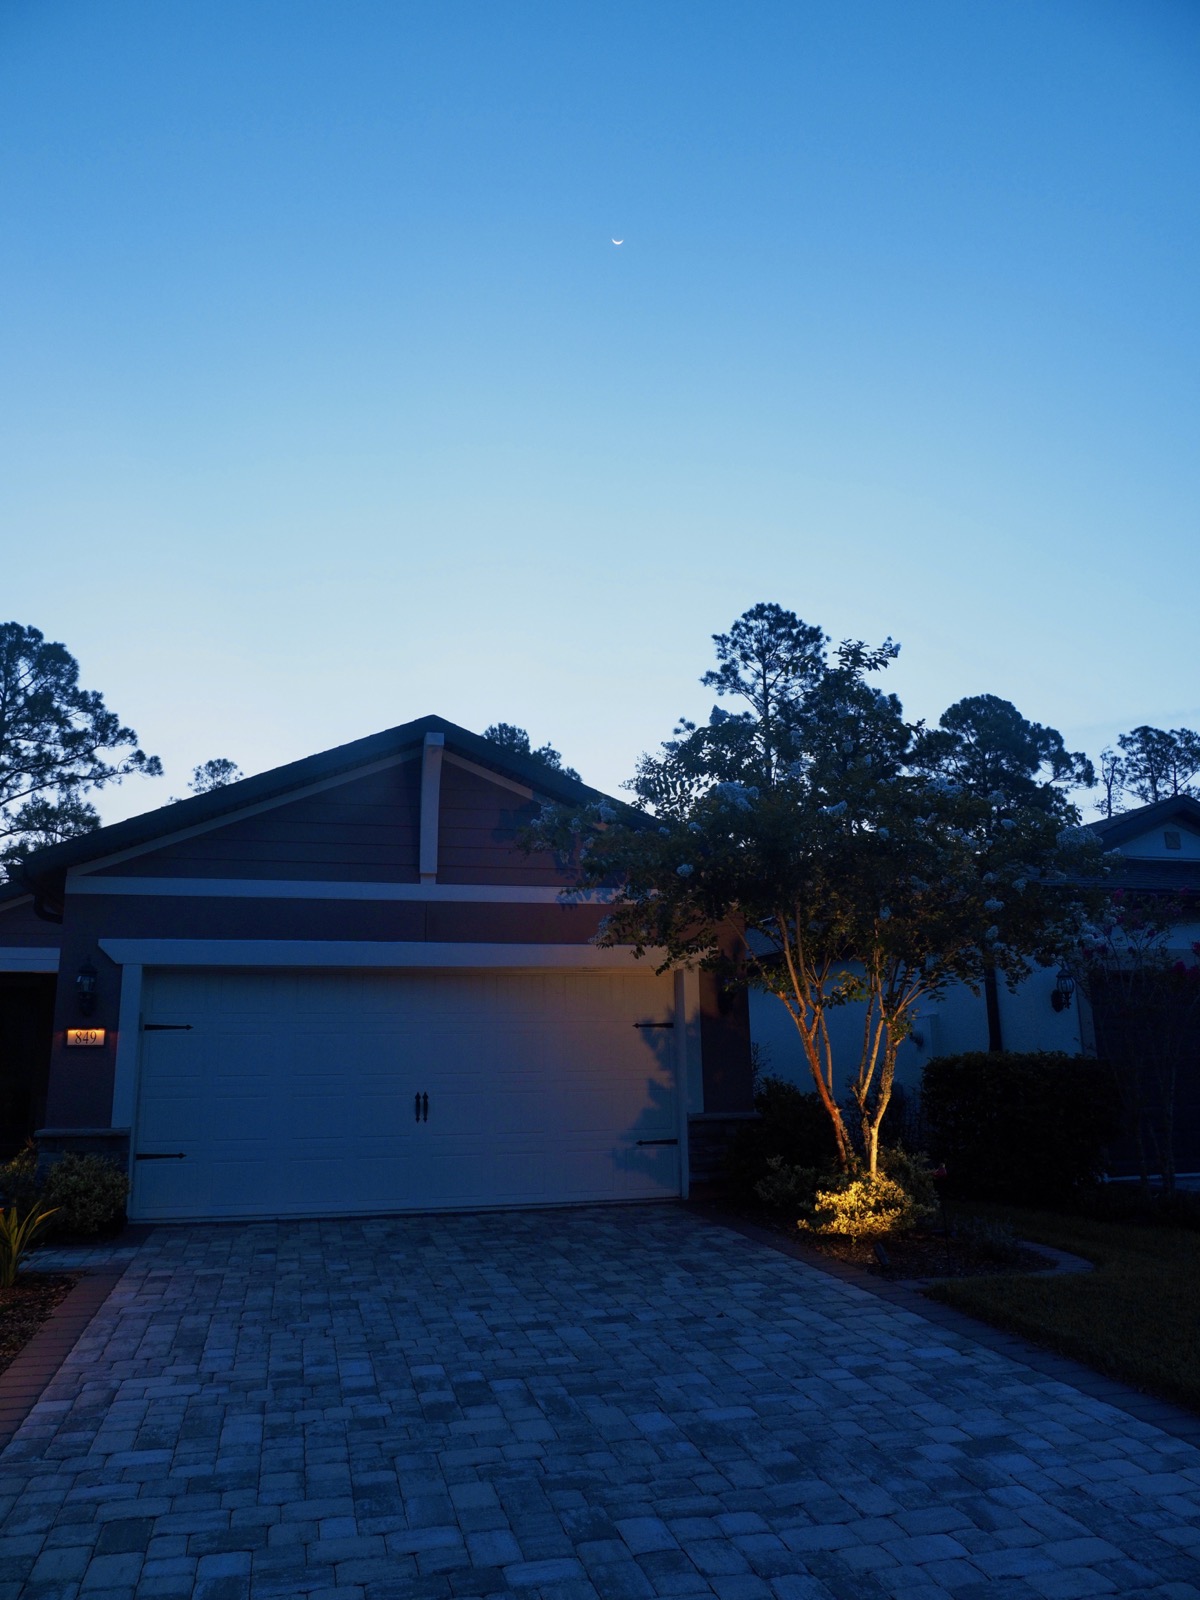 Wide angle portrait orientation shot of a tiny crescent moon barely visible in a blue sky above a suburban house in the minutes before dawn